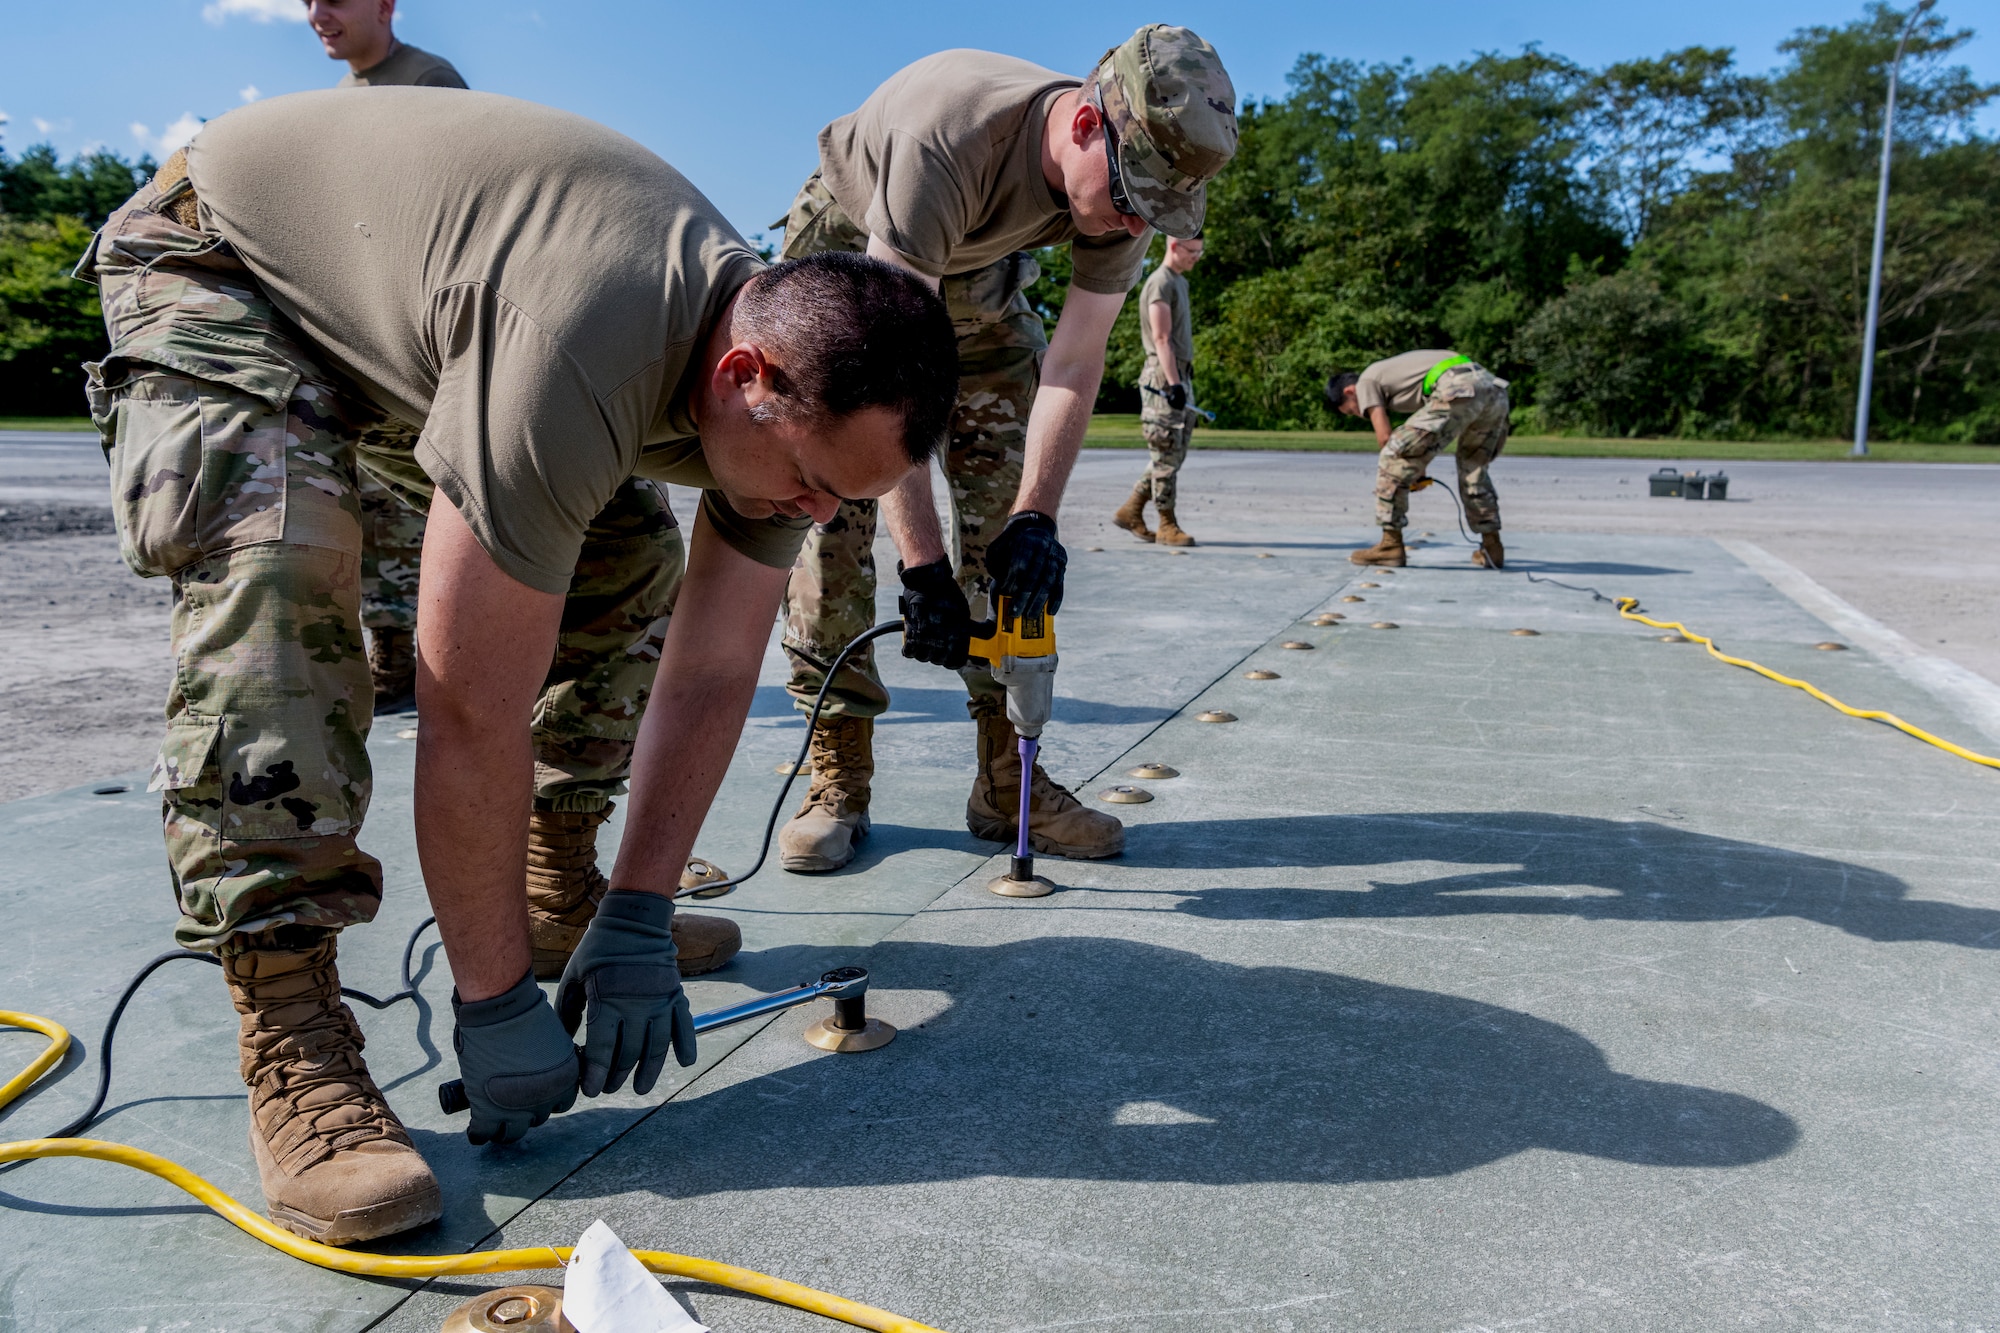 People in uniform use power tools to attach a surface to the ground.